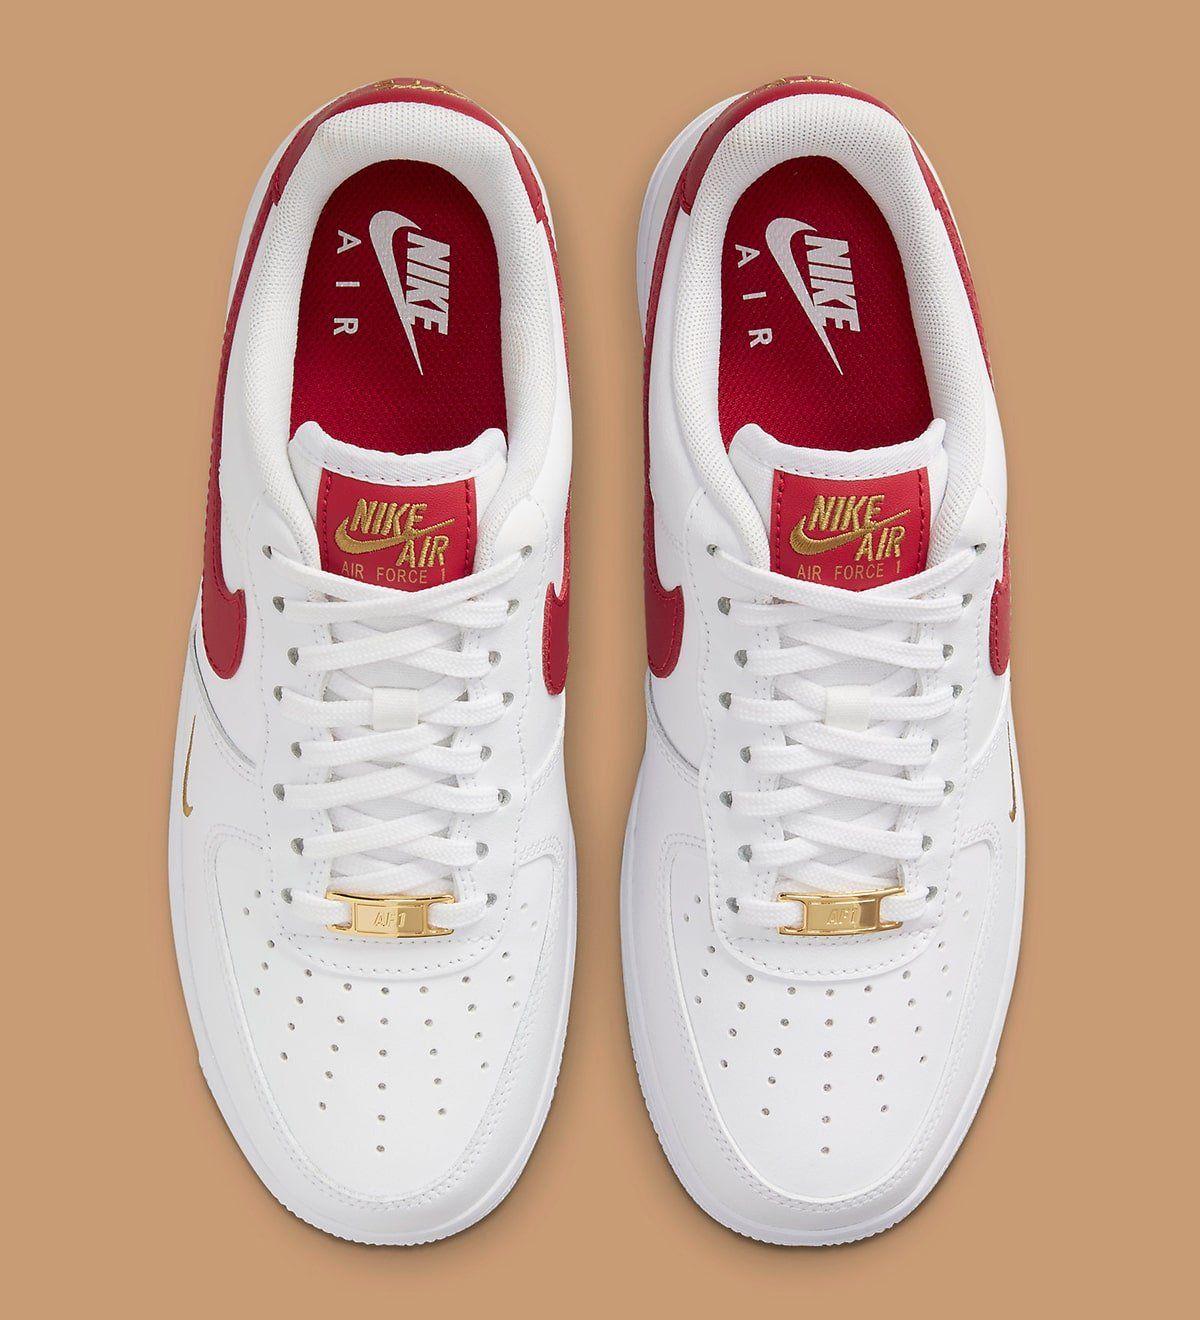 red and gold air force ones